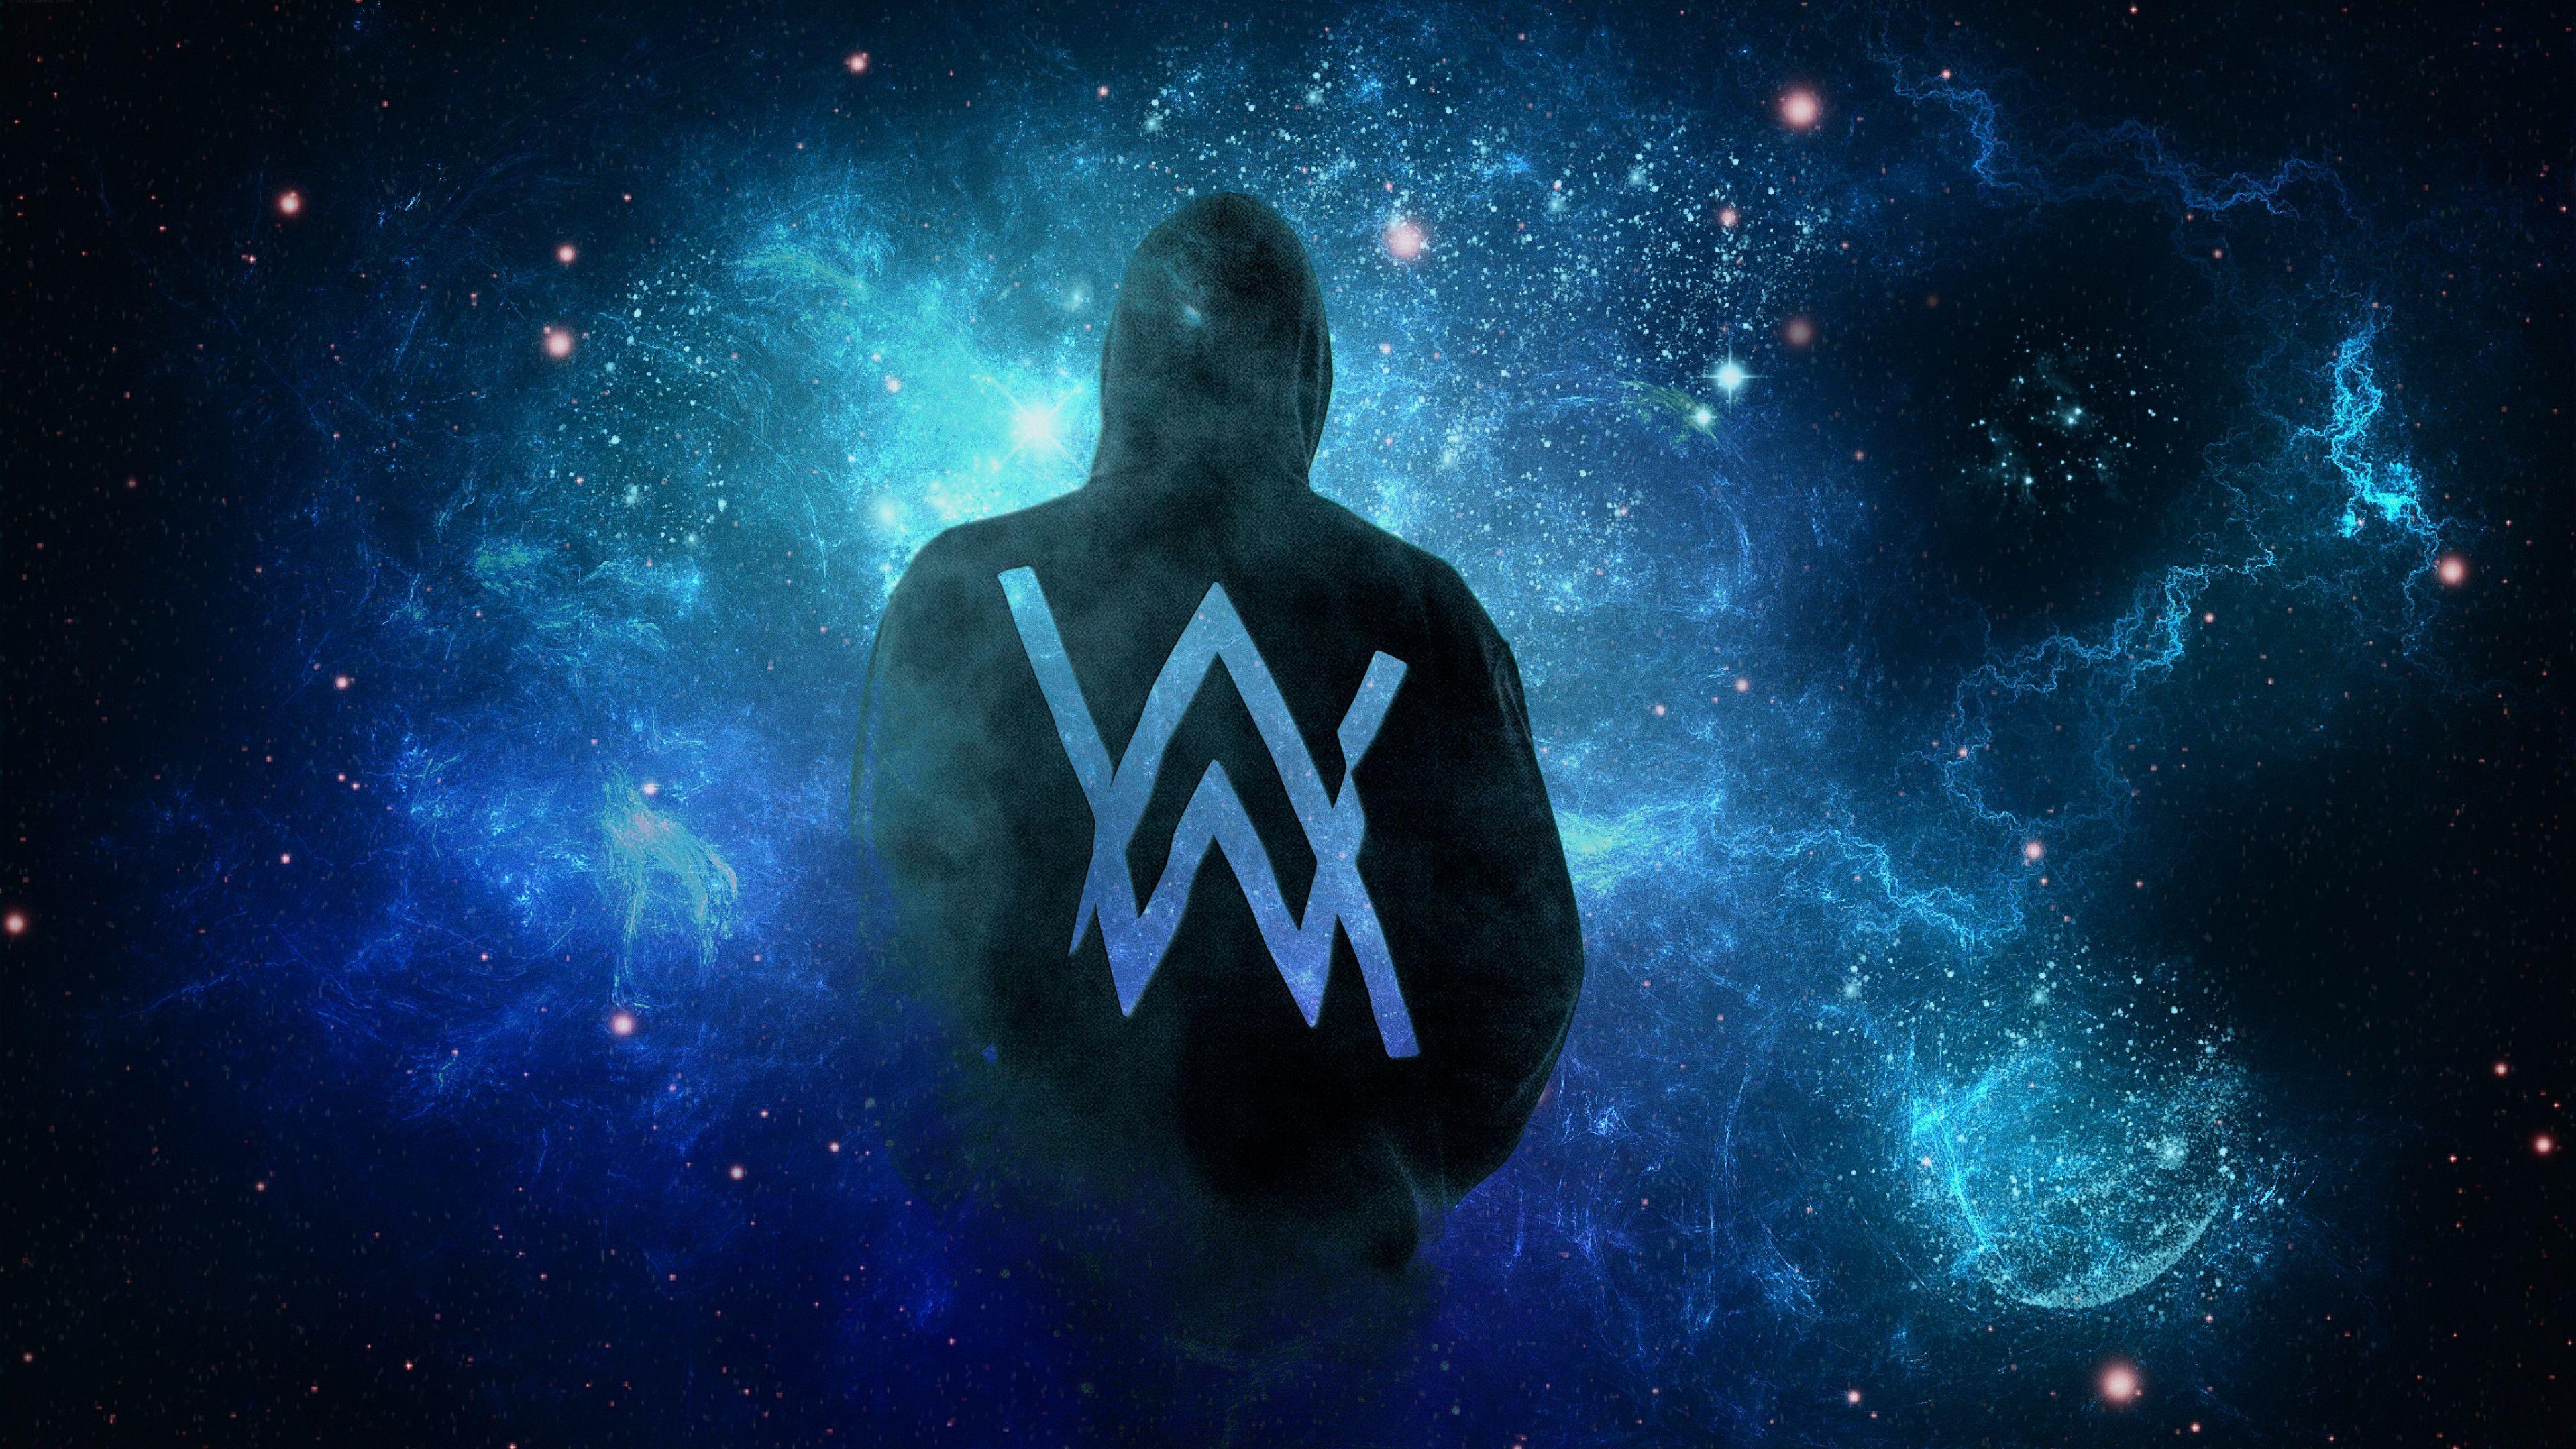 Alan Walker Image HD Wallpaper And Background Photos